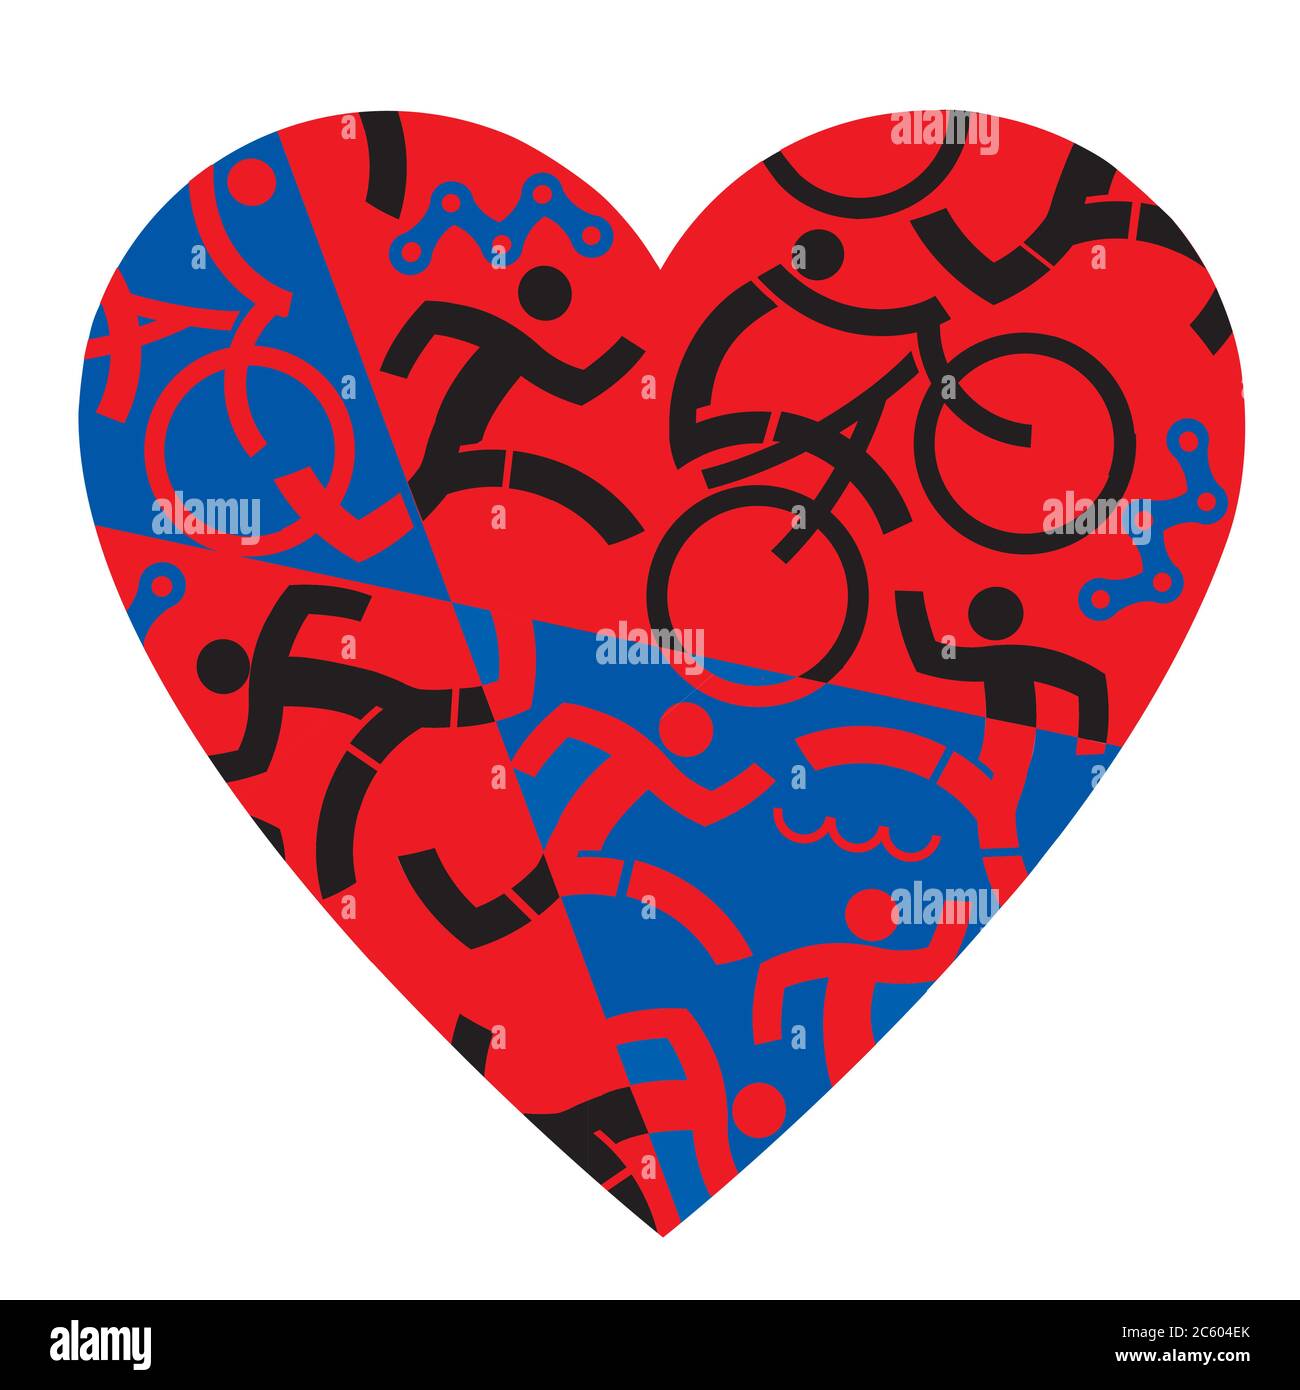 I love Triathlon, running, swimming, cycling. Illustration with red and black heart symbol with triathlon athletes, swimmers, cyclists, runners. Stock Vector